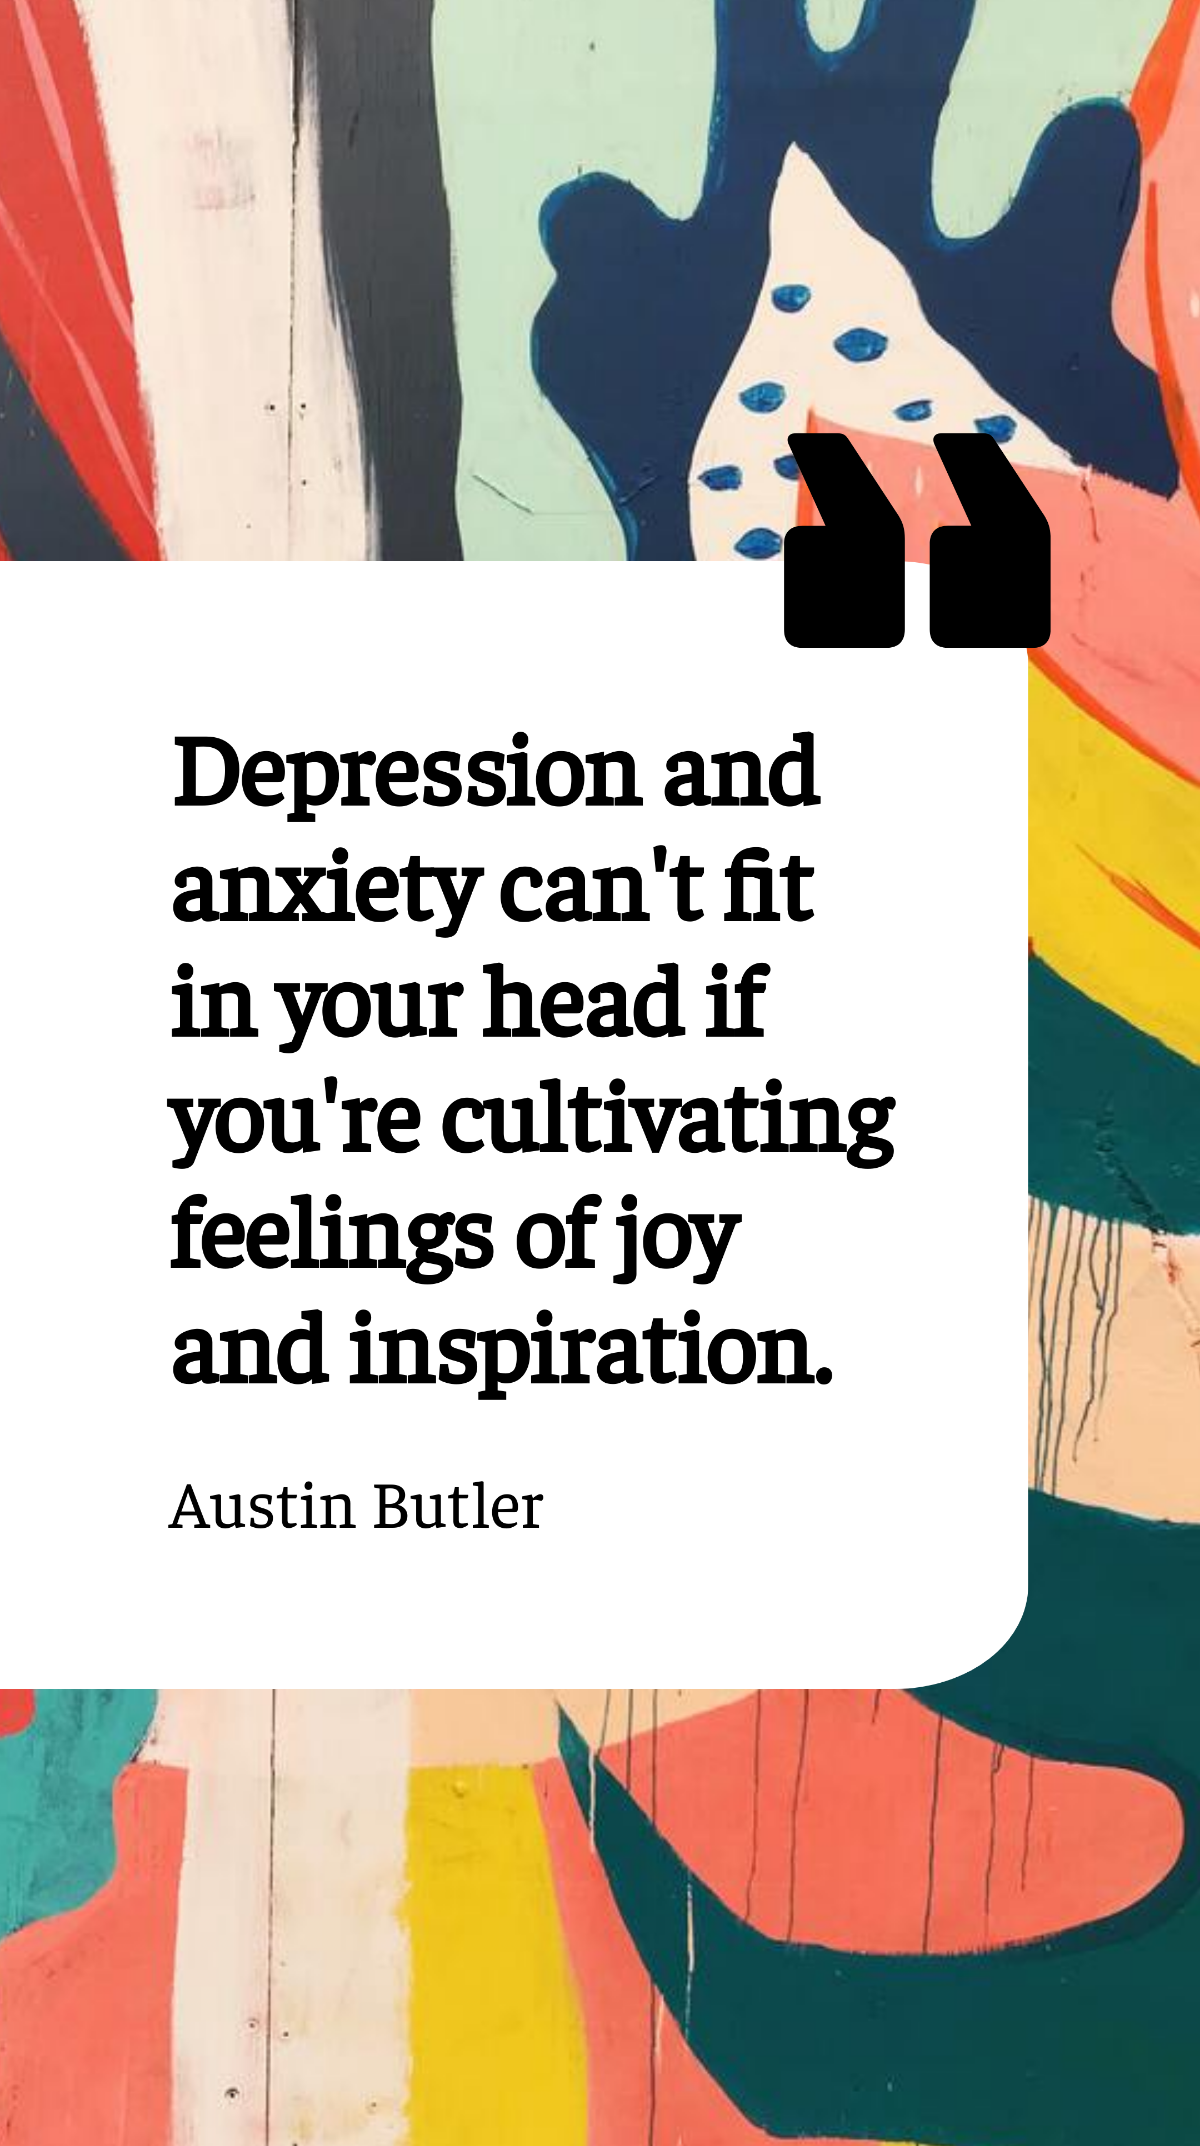 Austin Butler - Depression and anxiety can't fit in your head if you're cultivating feelings of joy and inspiration. Template